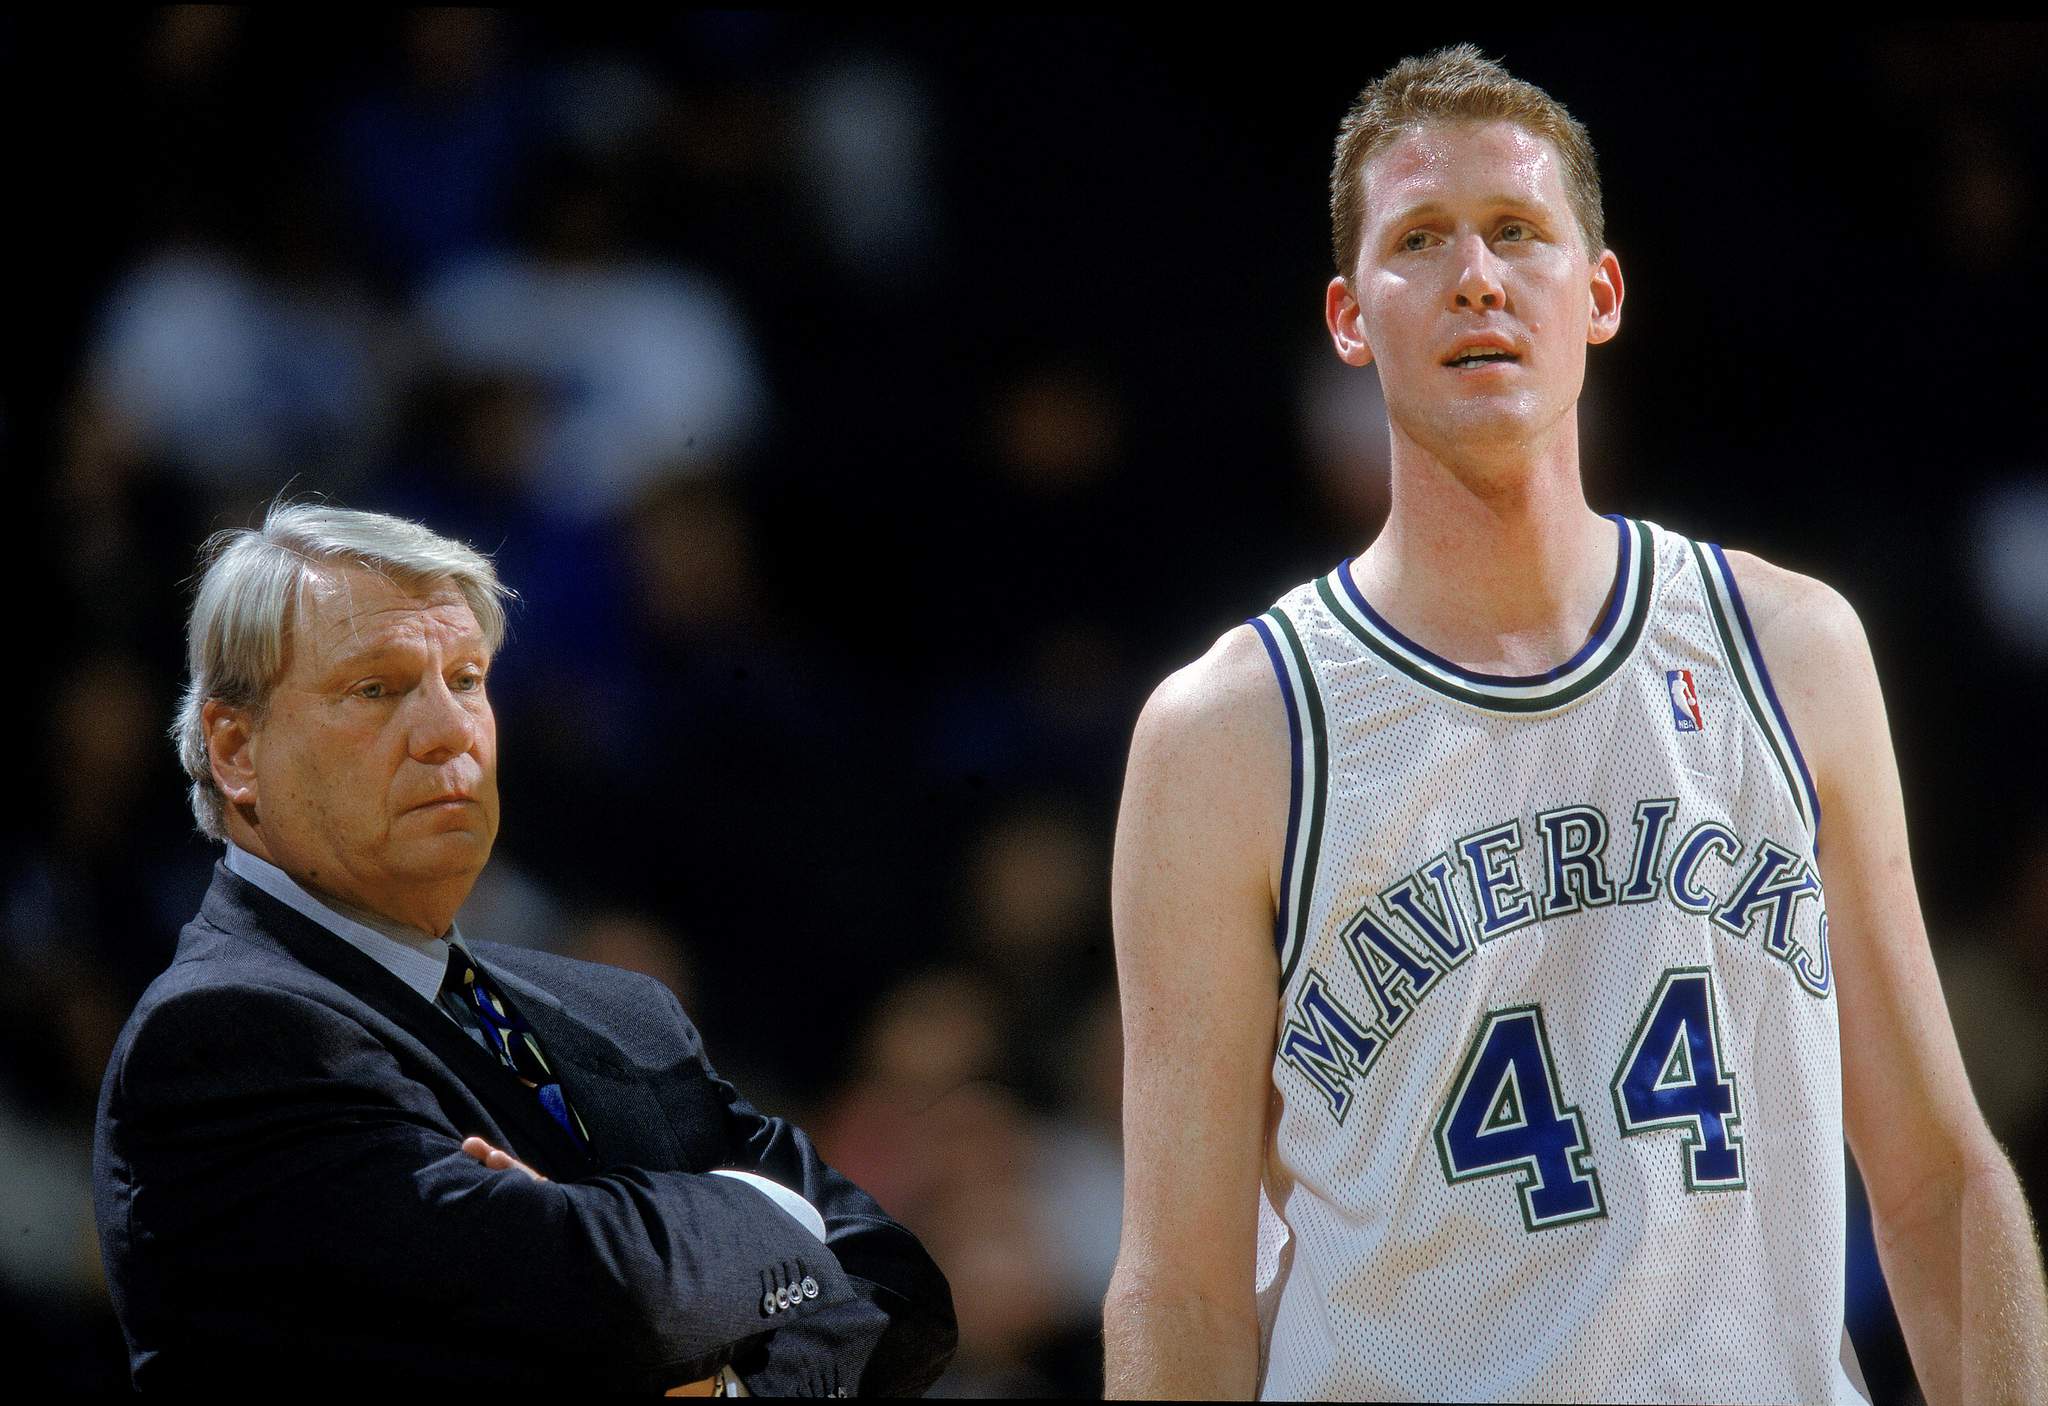 Ex-NBA player Shawn Bradley paralyzed in cycling accident